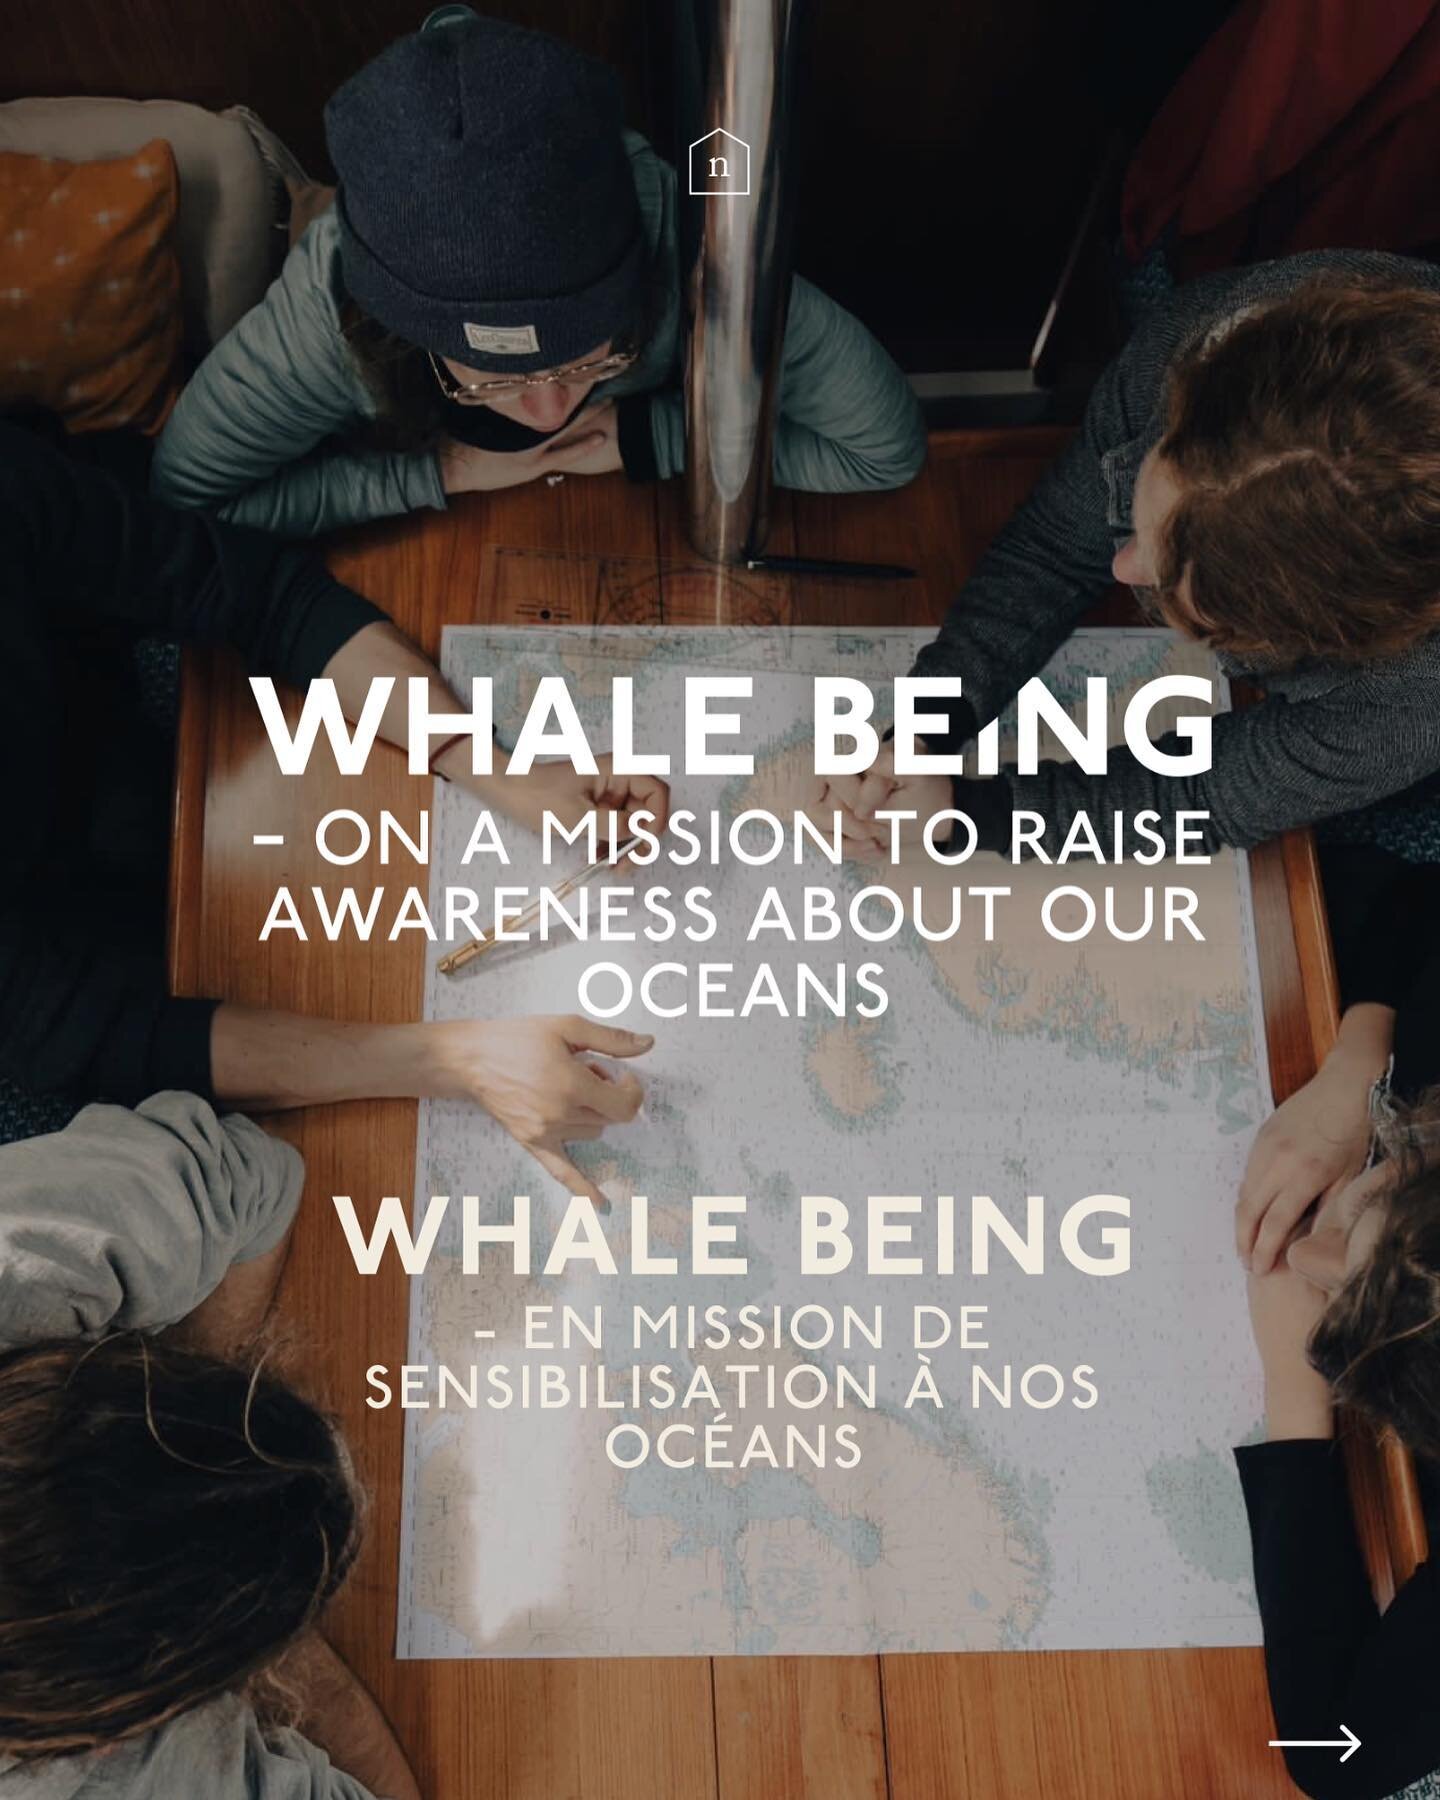 Discover our new interview with marine biologist Laetitia Michell, a Luxembourger about to set sail as part of Whale Being, a new sailing mission by Arvik Ocean dedicated to raising awareness about the impact of human activities on marine life 🌊🐋 
